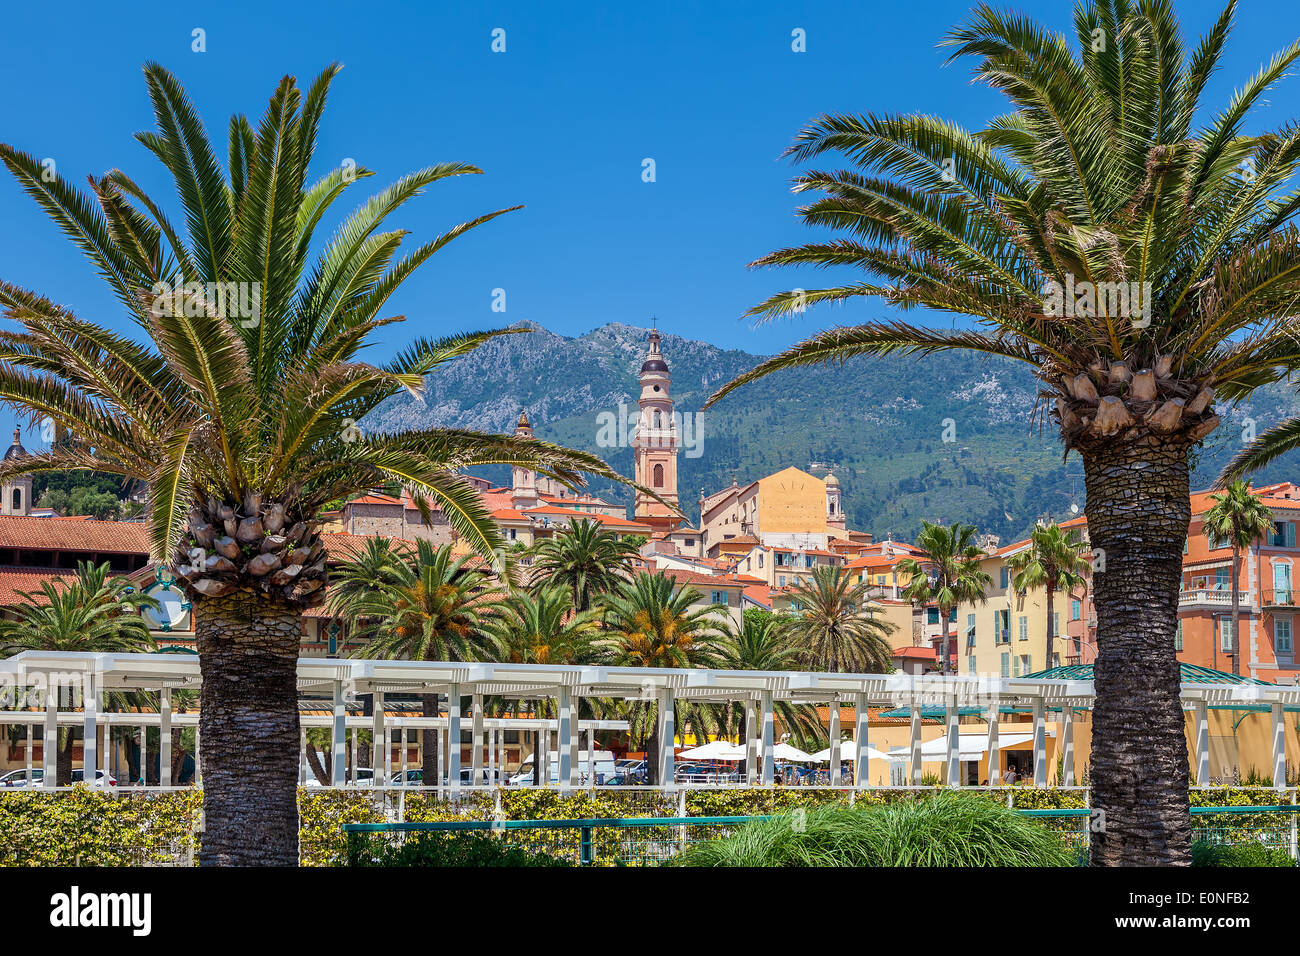 Palms on small town square and colorful houses with bell tower on background in Menton, France. Stock Photo